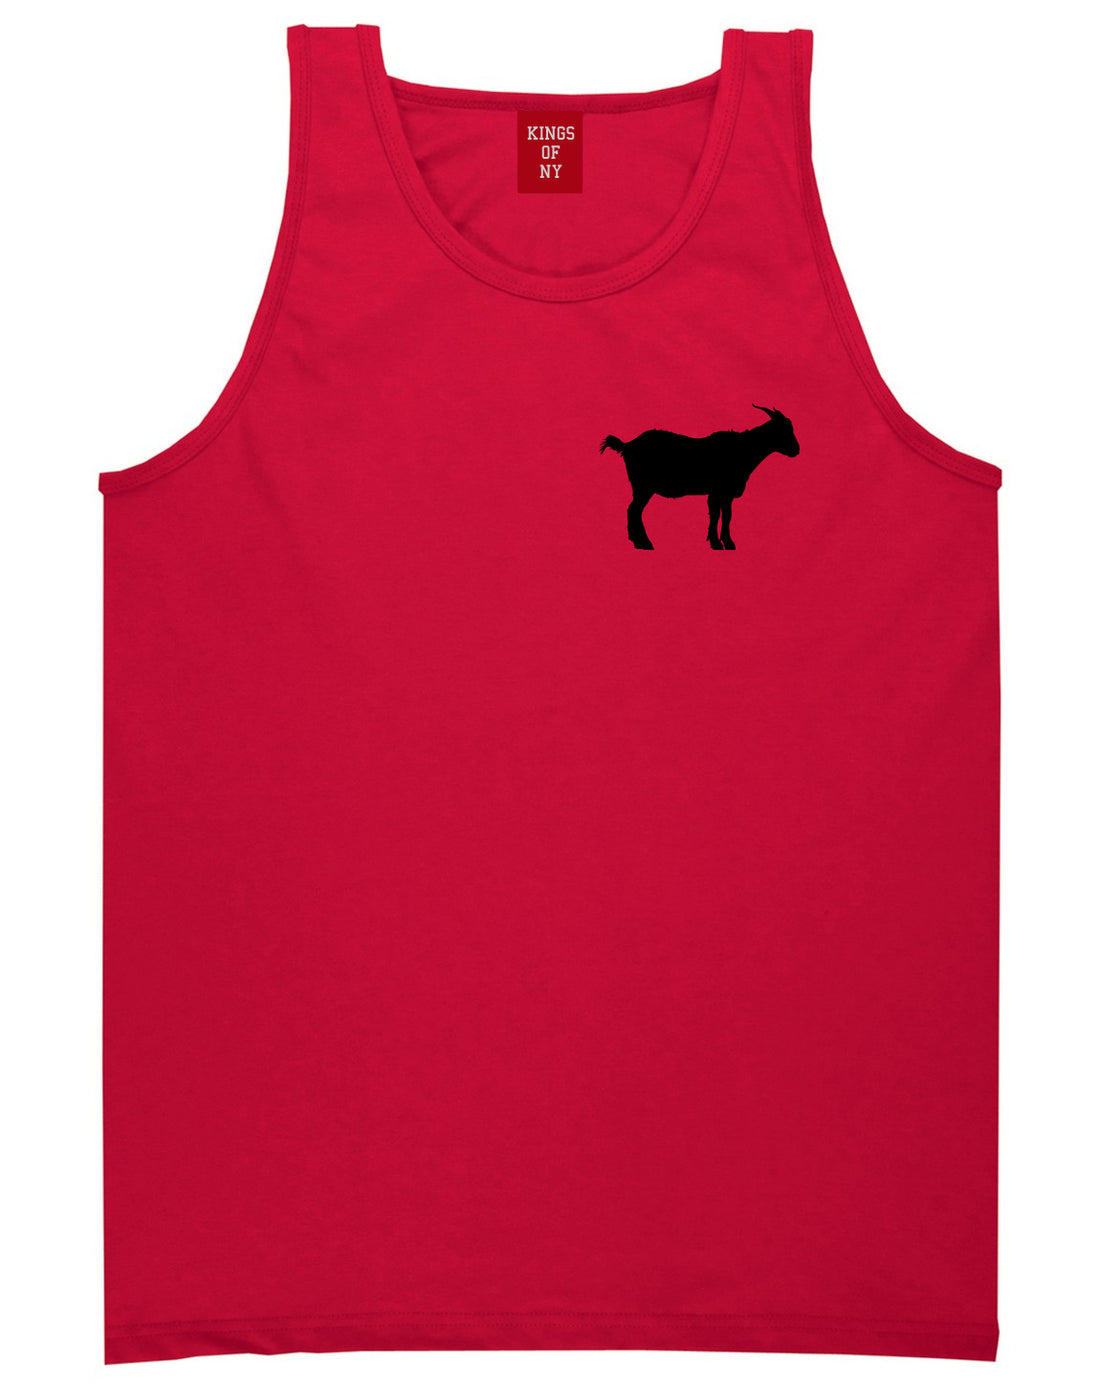 Goat Animal Chest Mens Red Tank Top Shirt by KINGS OF NY